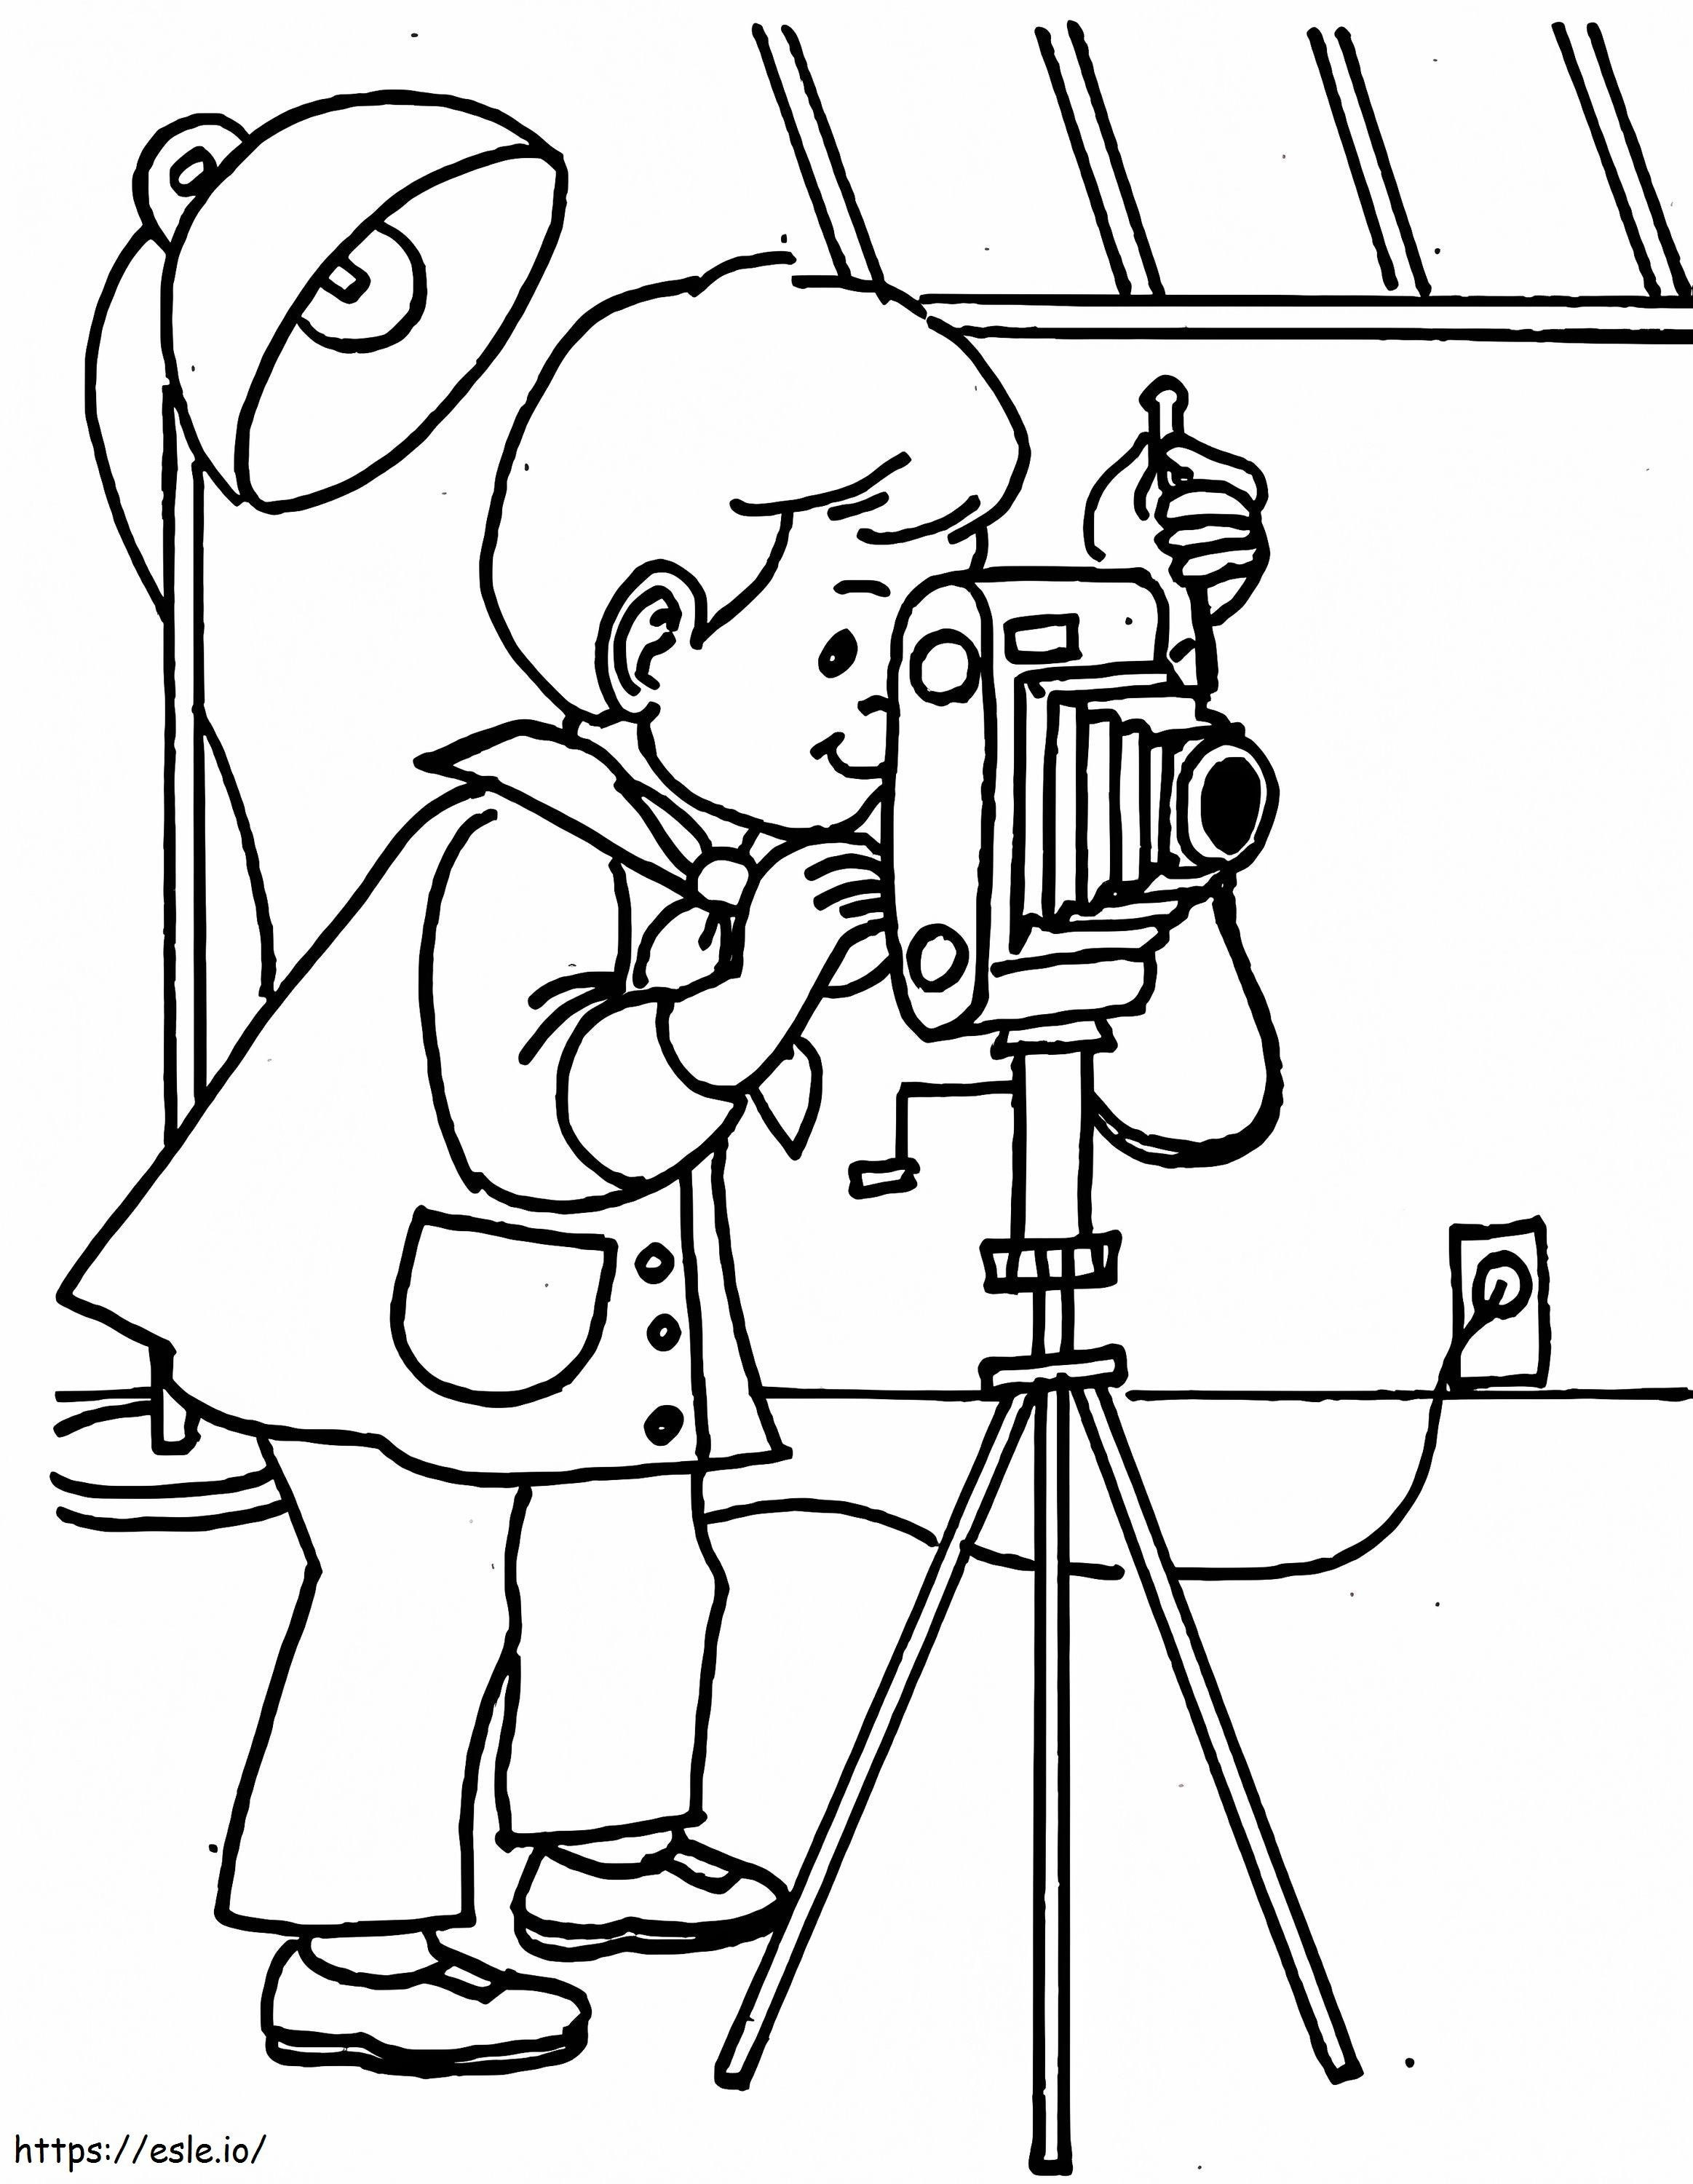 Boy Photographer coloring page